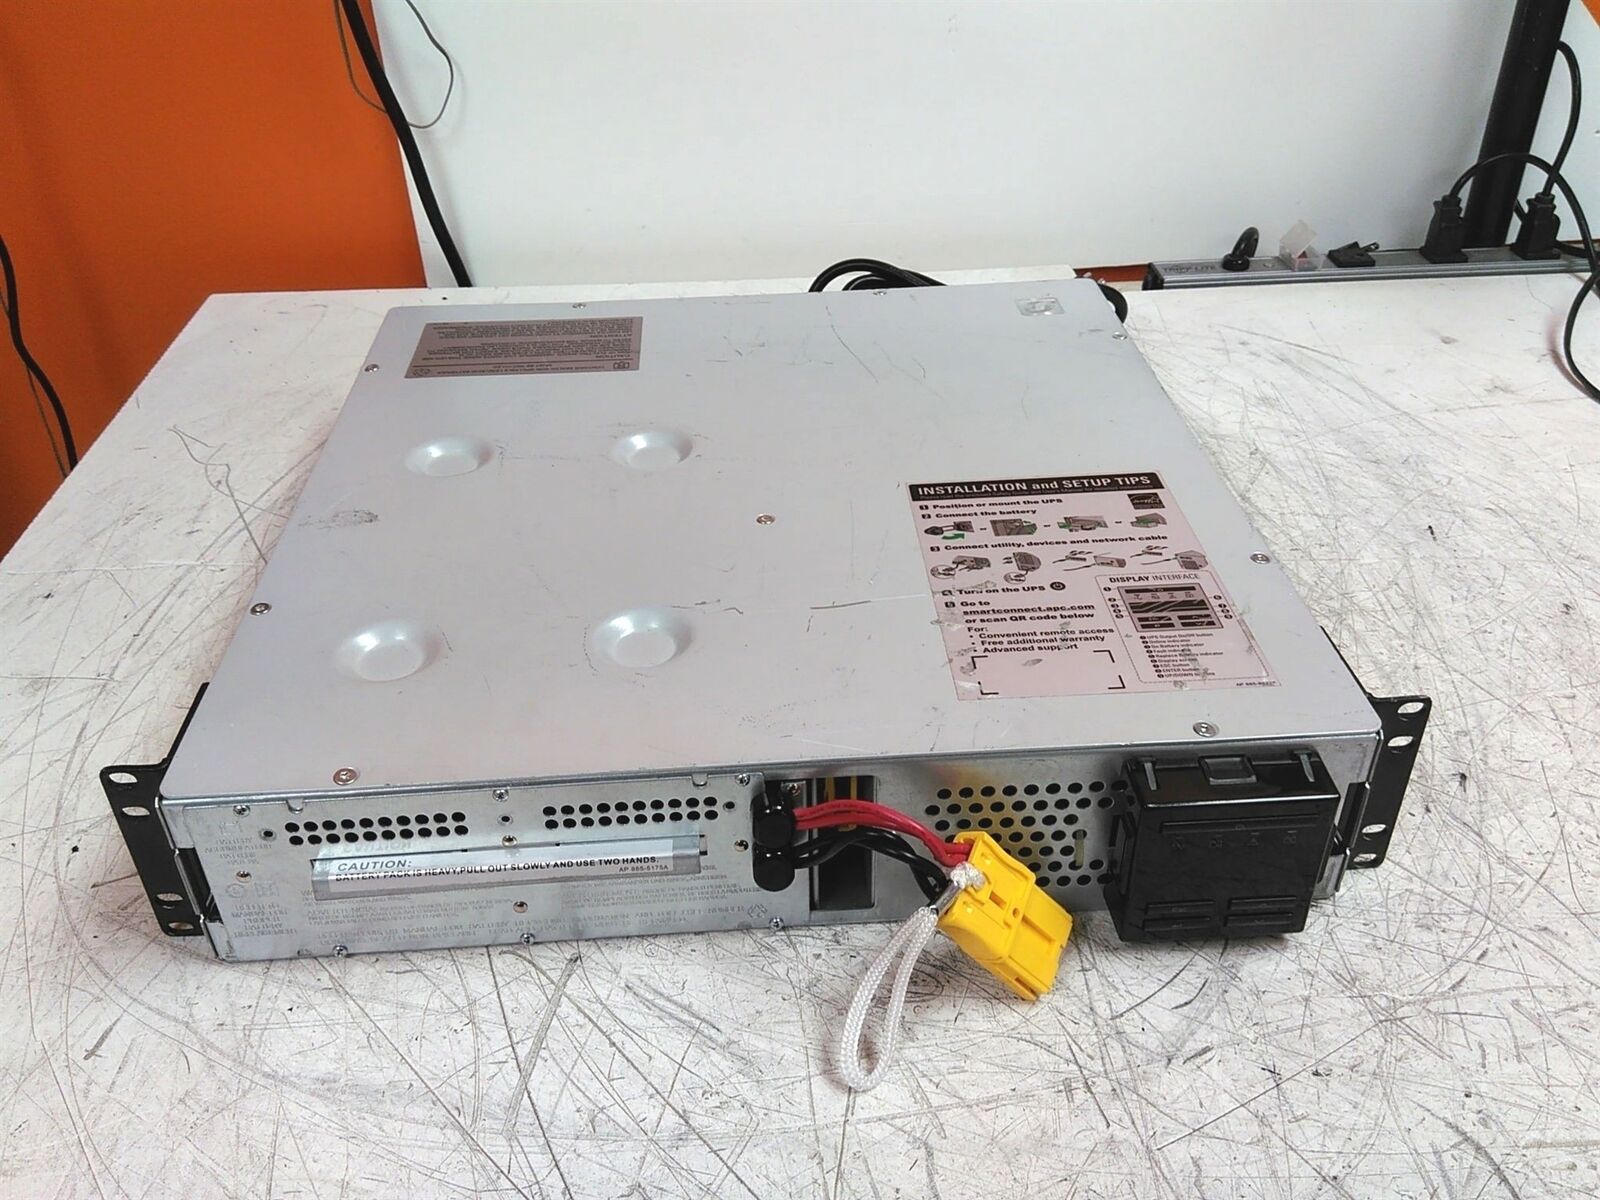 Power Tested Only APC SMT1500RM2UC Smart-UPS 2U Rackmount 120V No Battery AS-IS